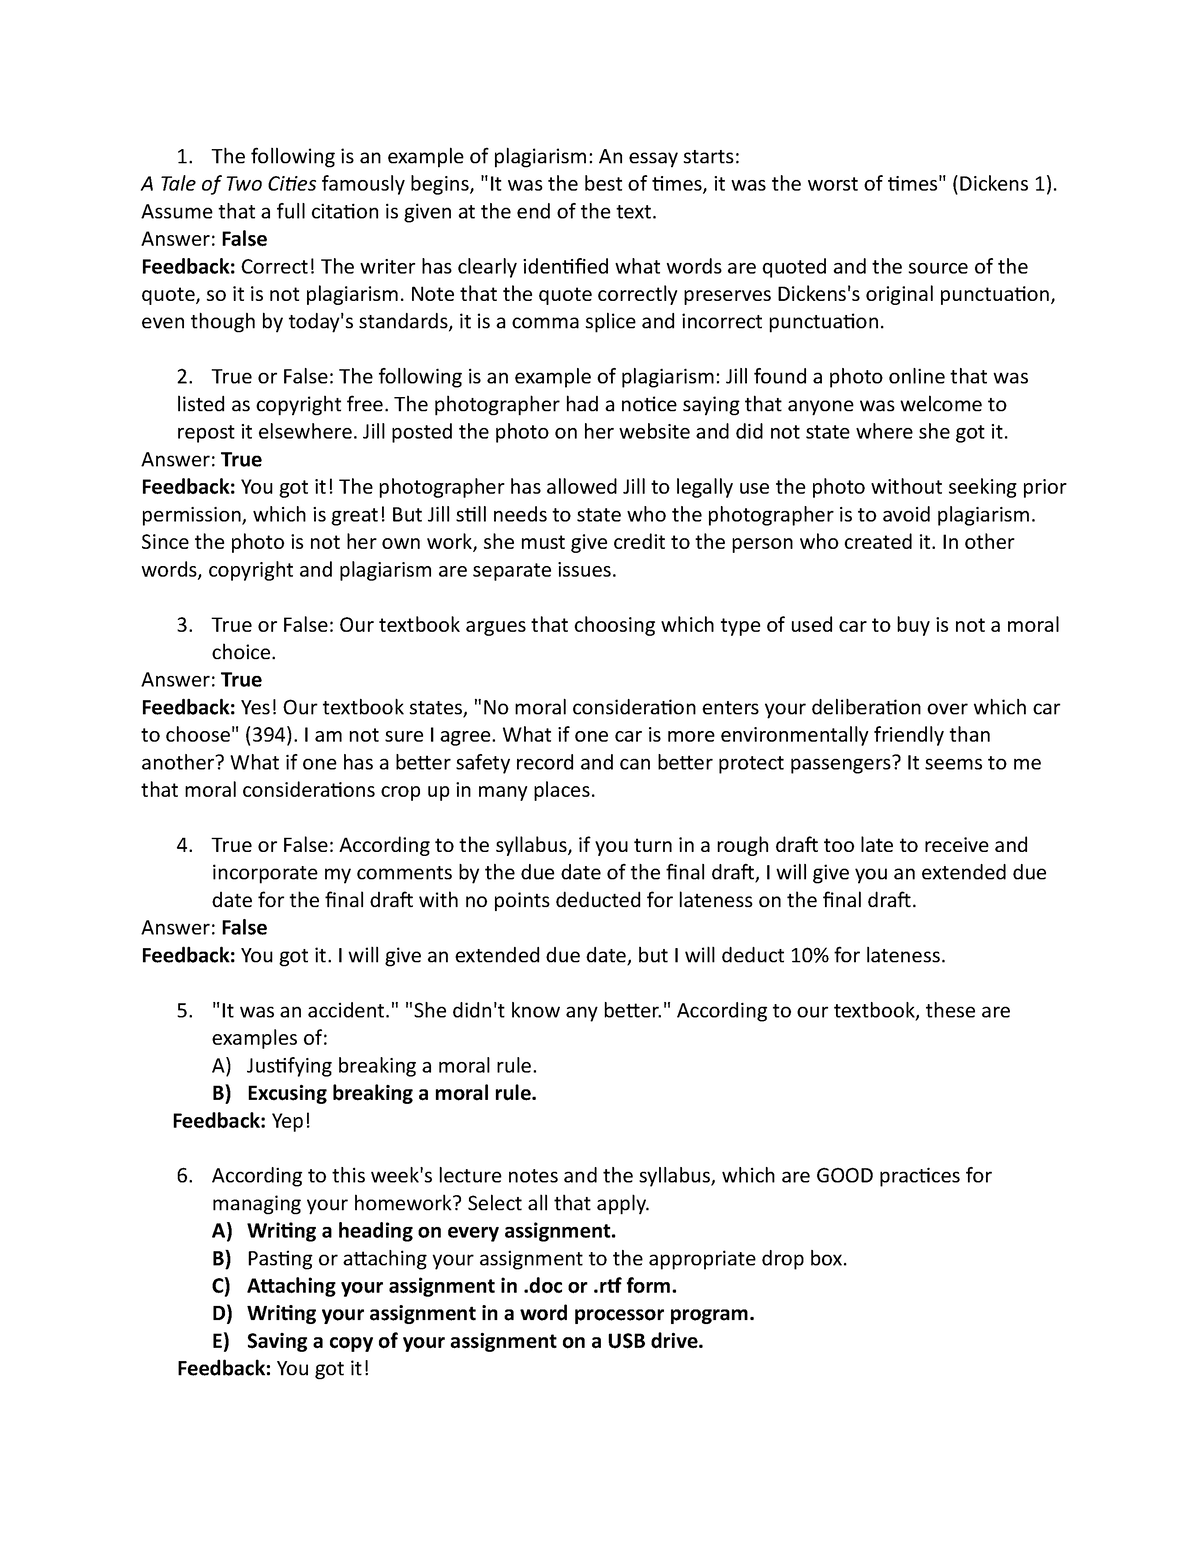 WR 122 notes - Guidance - The following is an example of plagiarism: An ...